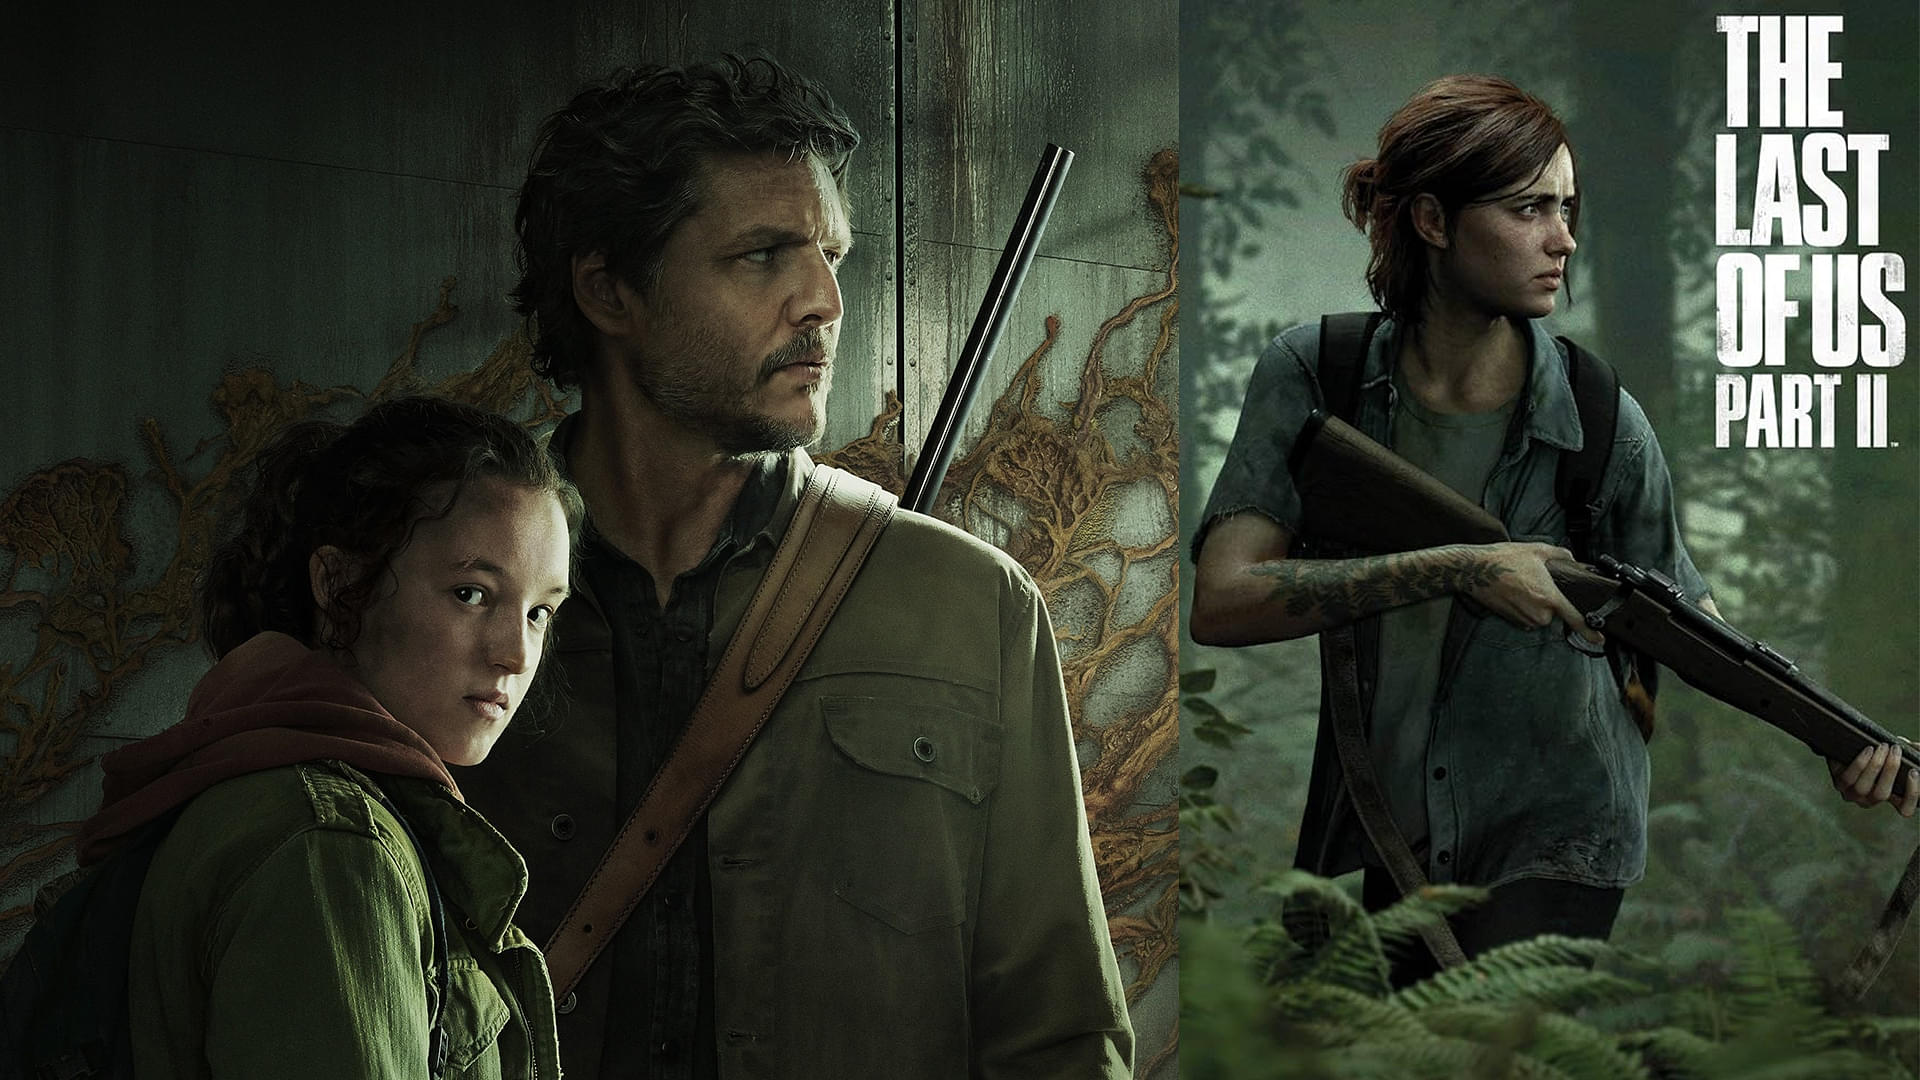 An image showing Joel and Ellie from The Last of Us